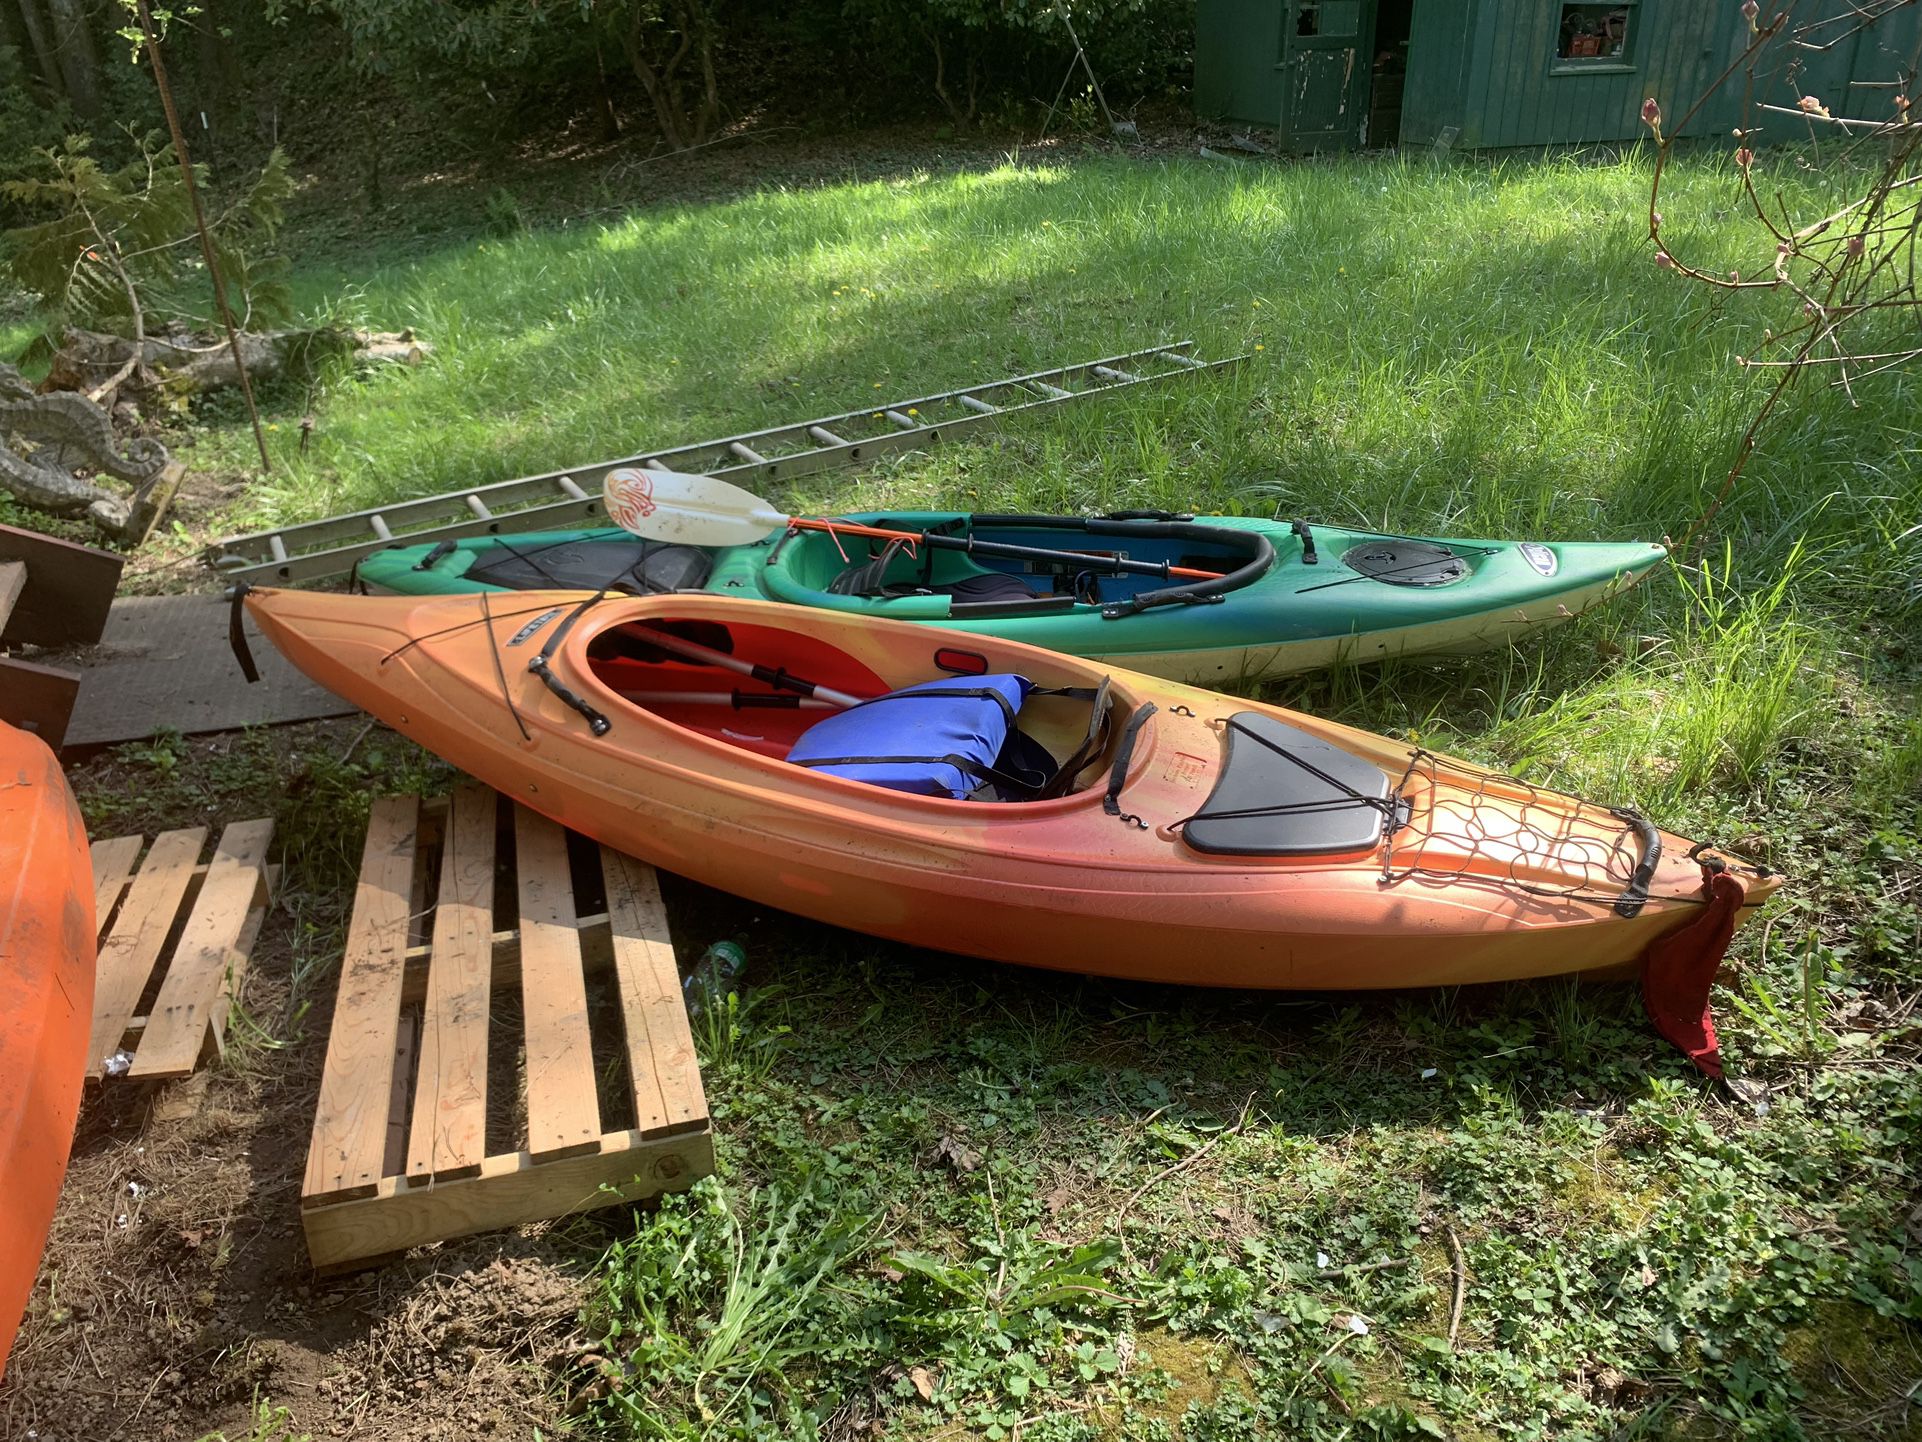 Kayaks … Each $200 Or Both For $350